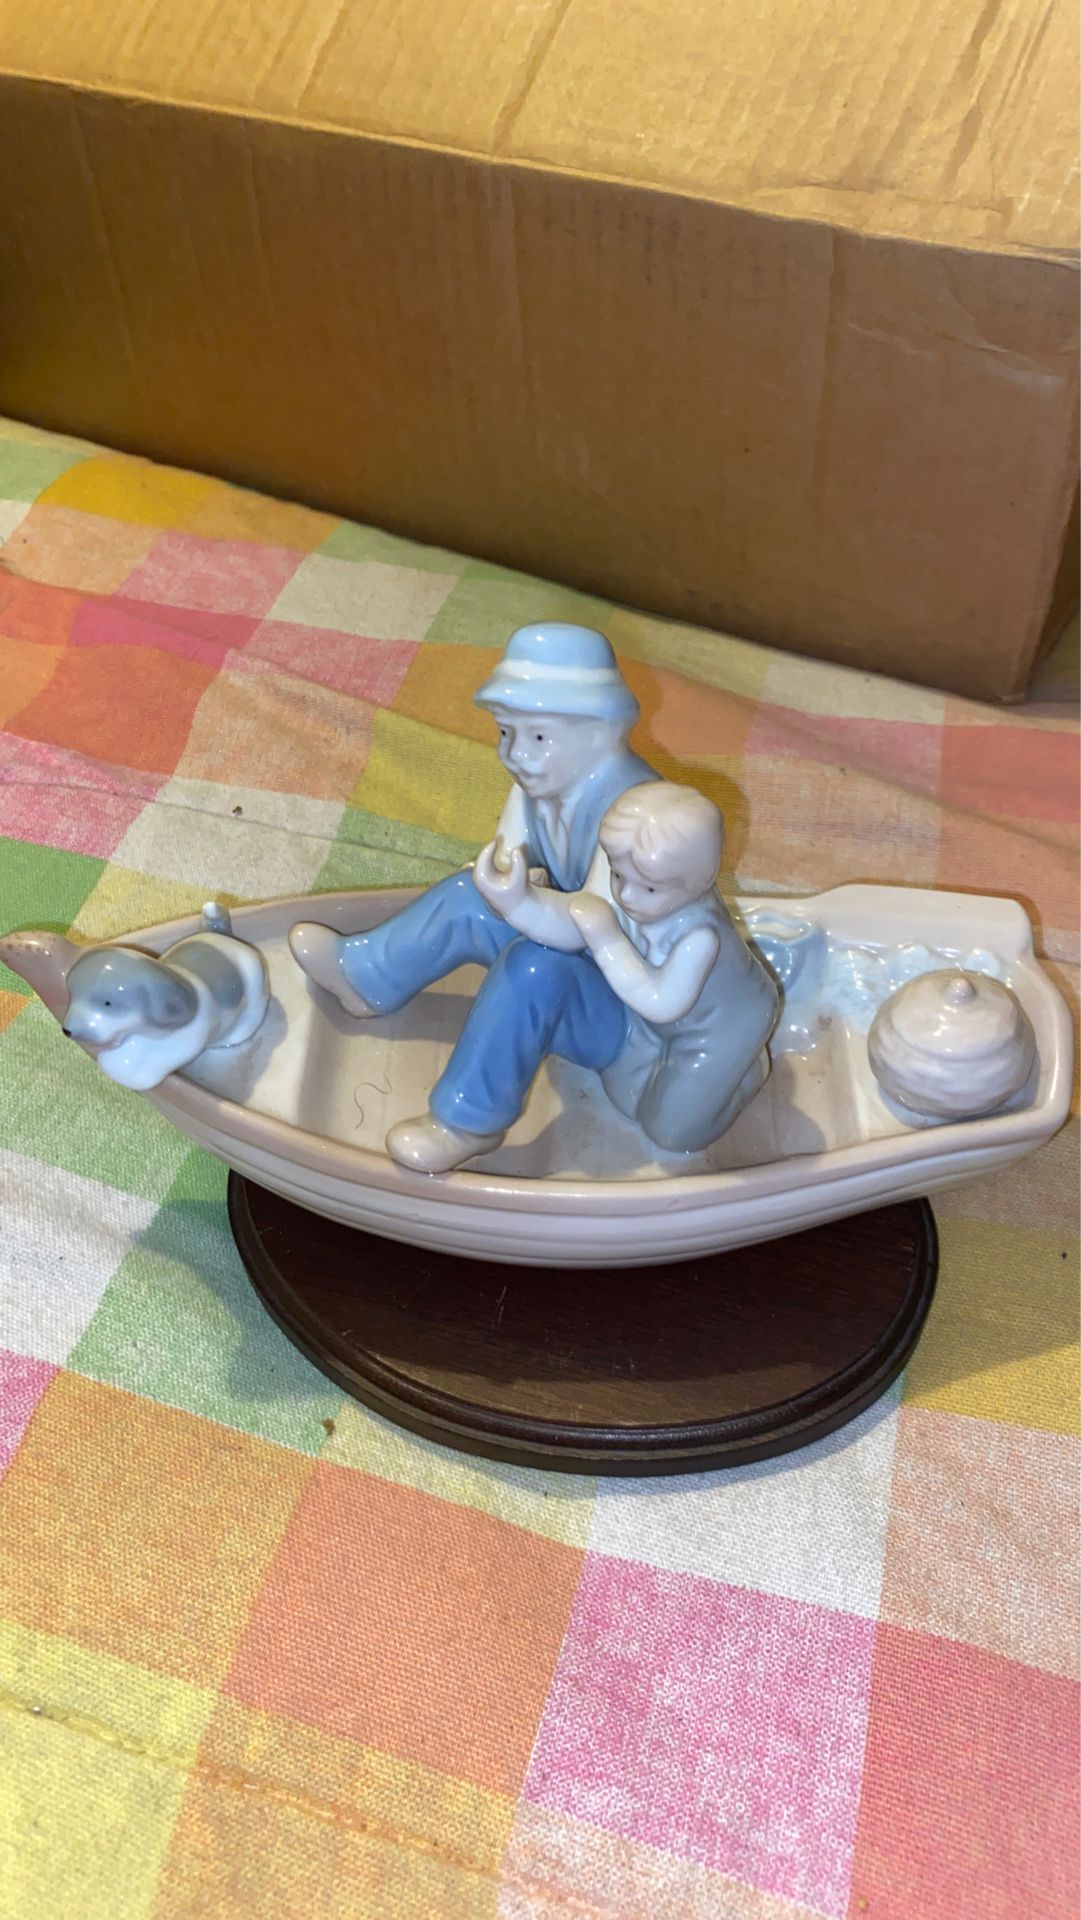 Porcelain fishing boat with man, boy and dog